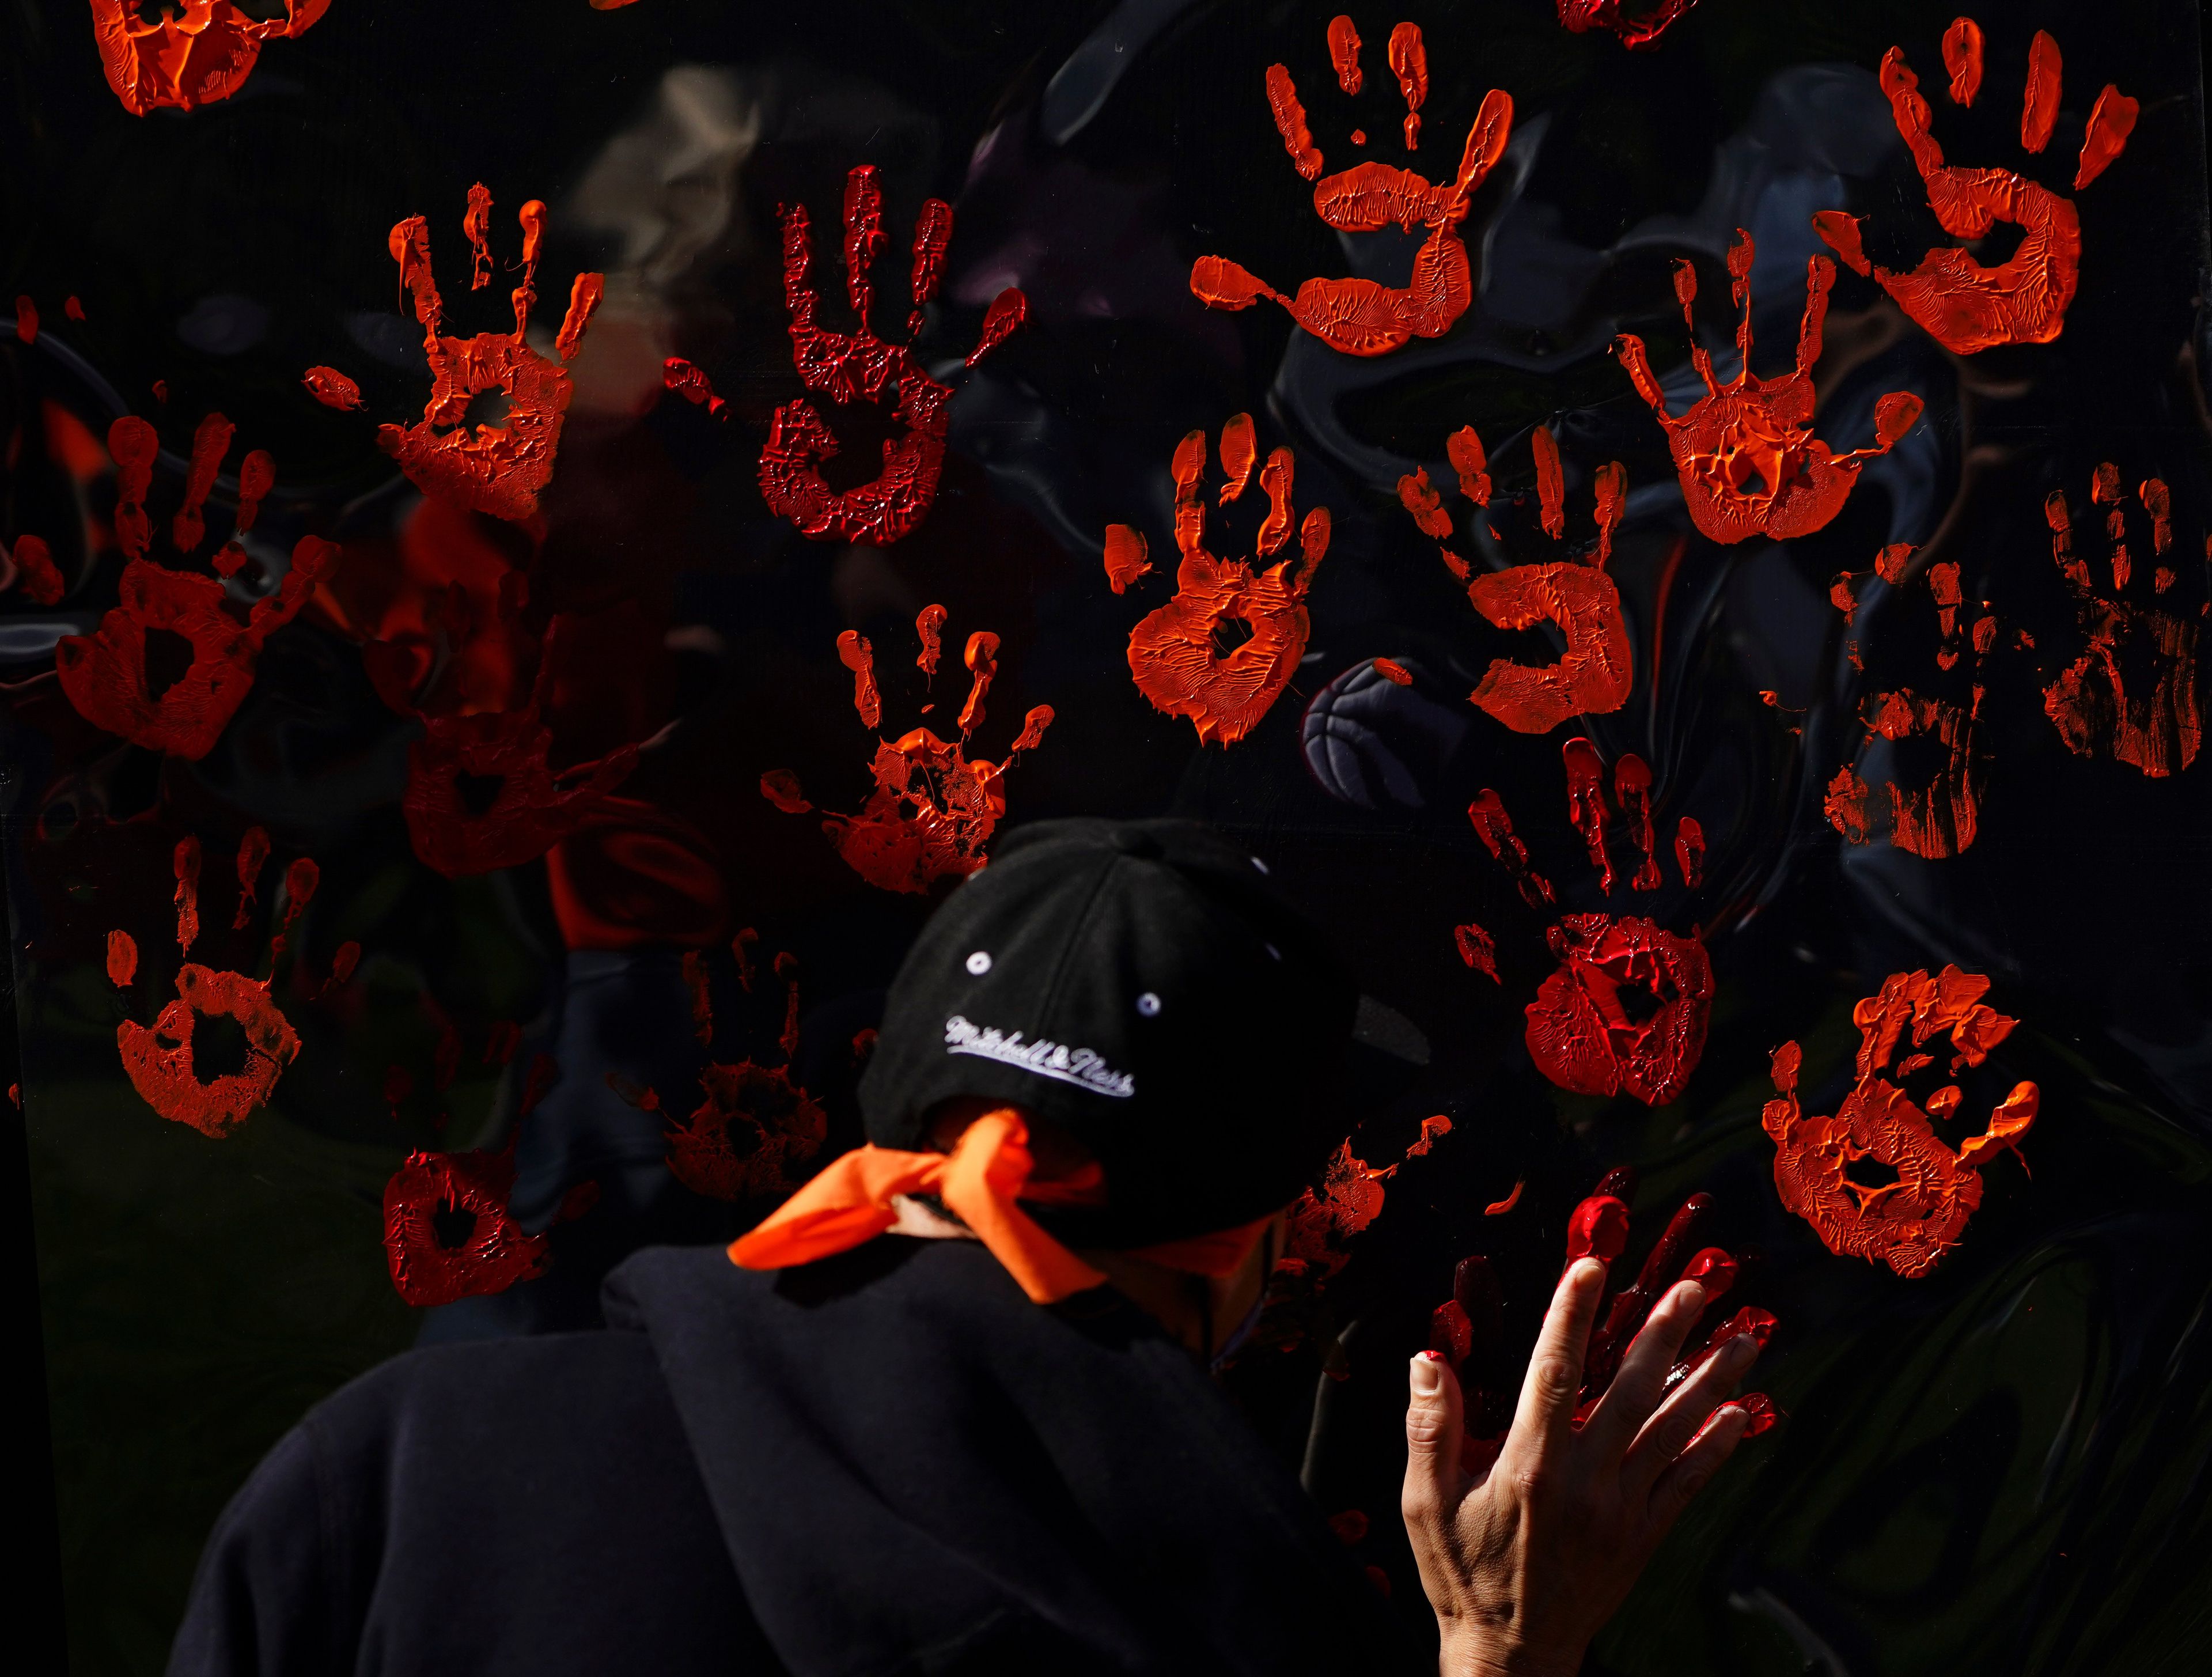 People contribute to a hand painting during the National Day for Truth and Reconciliation in Ottawa on Thursday, Sept. 30, 2021. THE CANADIAN PRESS/Sean Kilpatrick